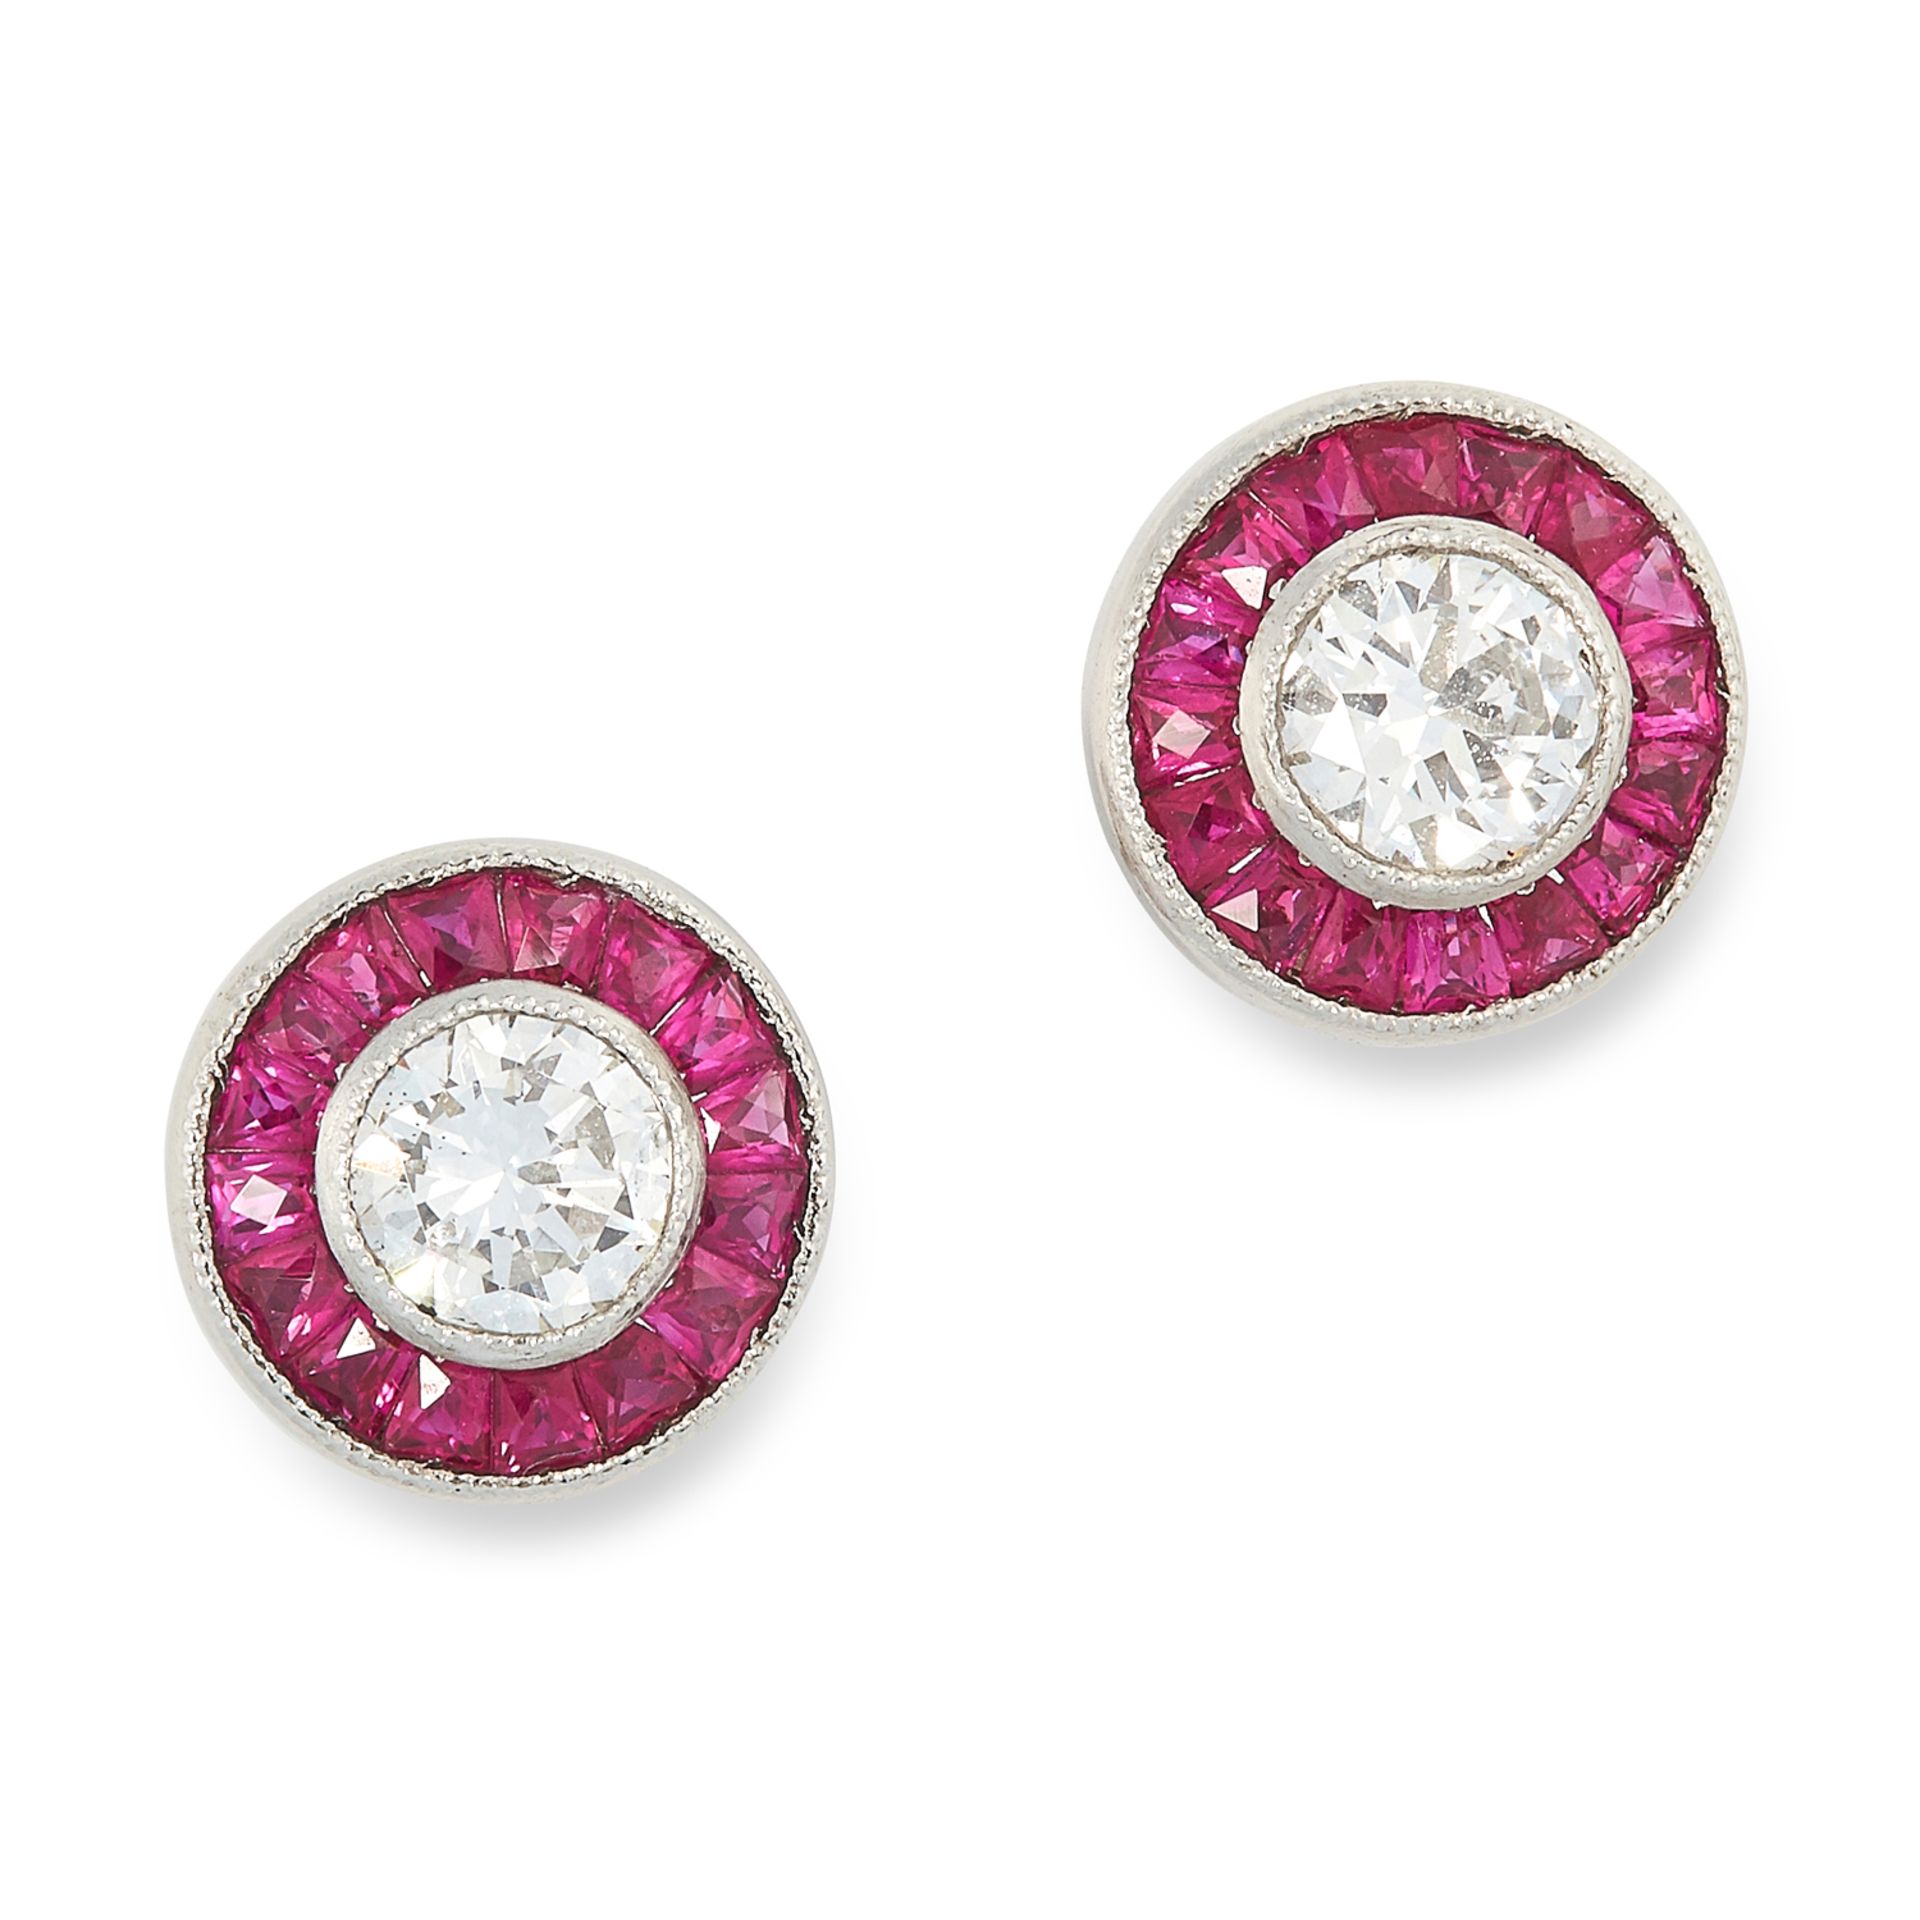 A PAIR OF DIAMOND AND RUBY TARGET EARRINGS each set with a round cut diamond within a border of